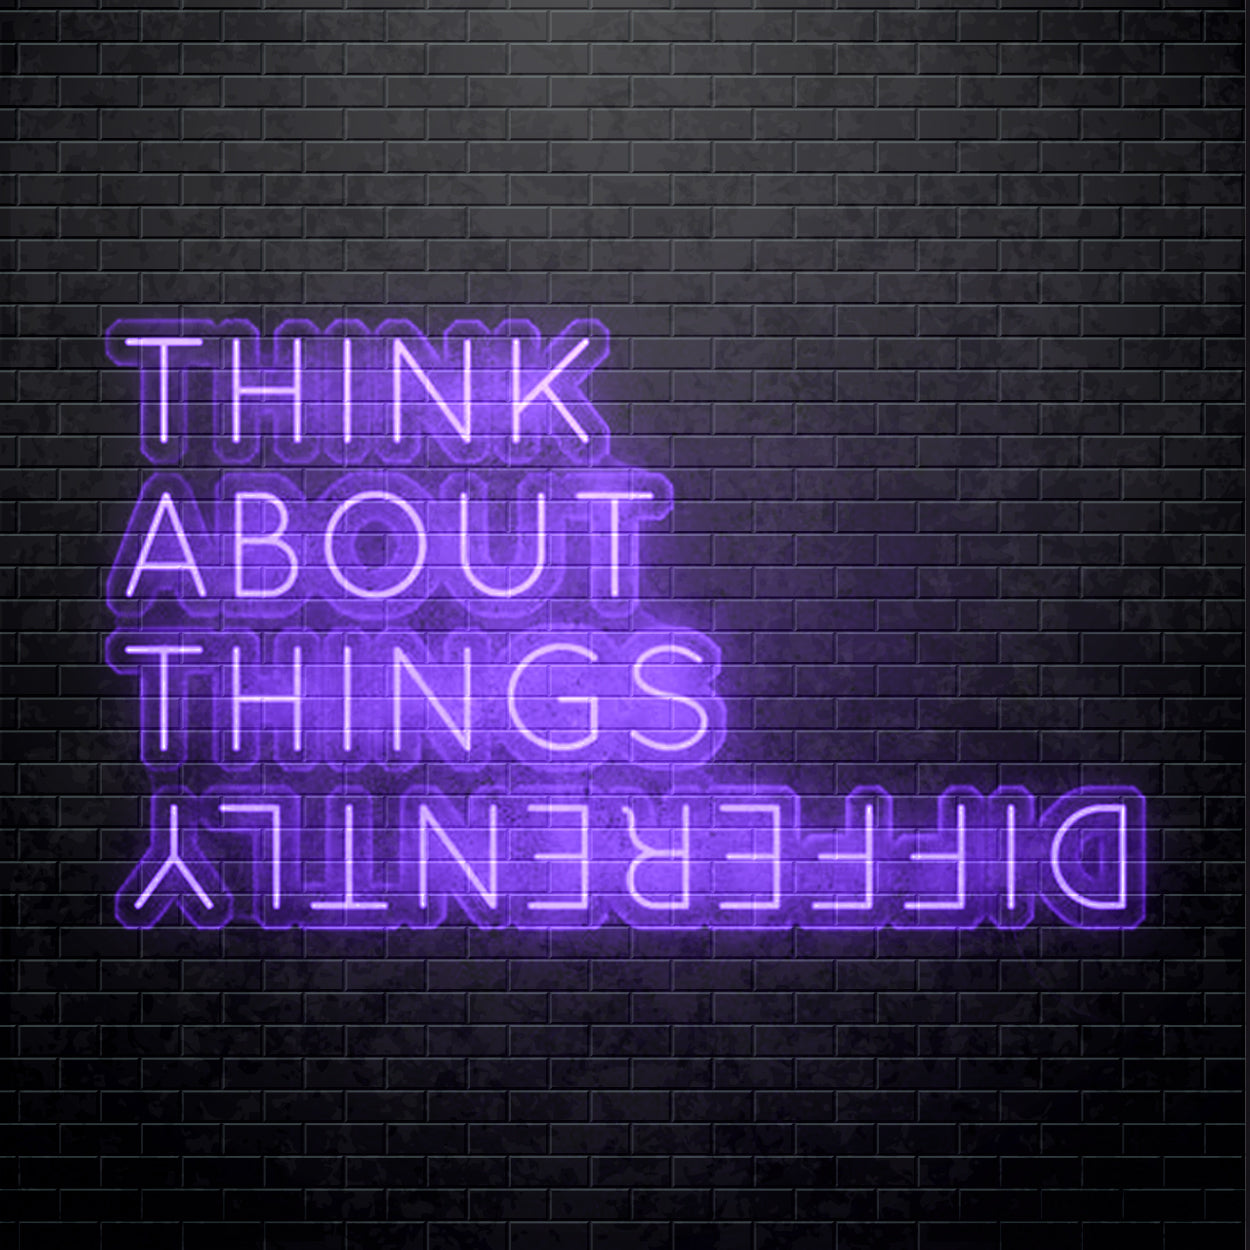 LED Neon sign - Think about things differently